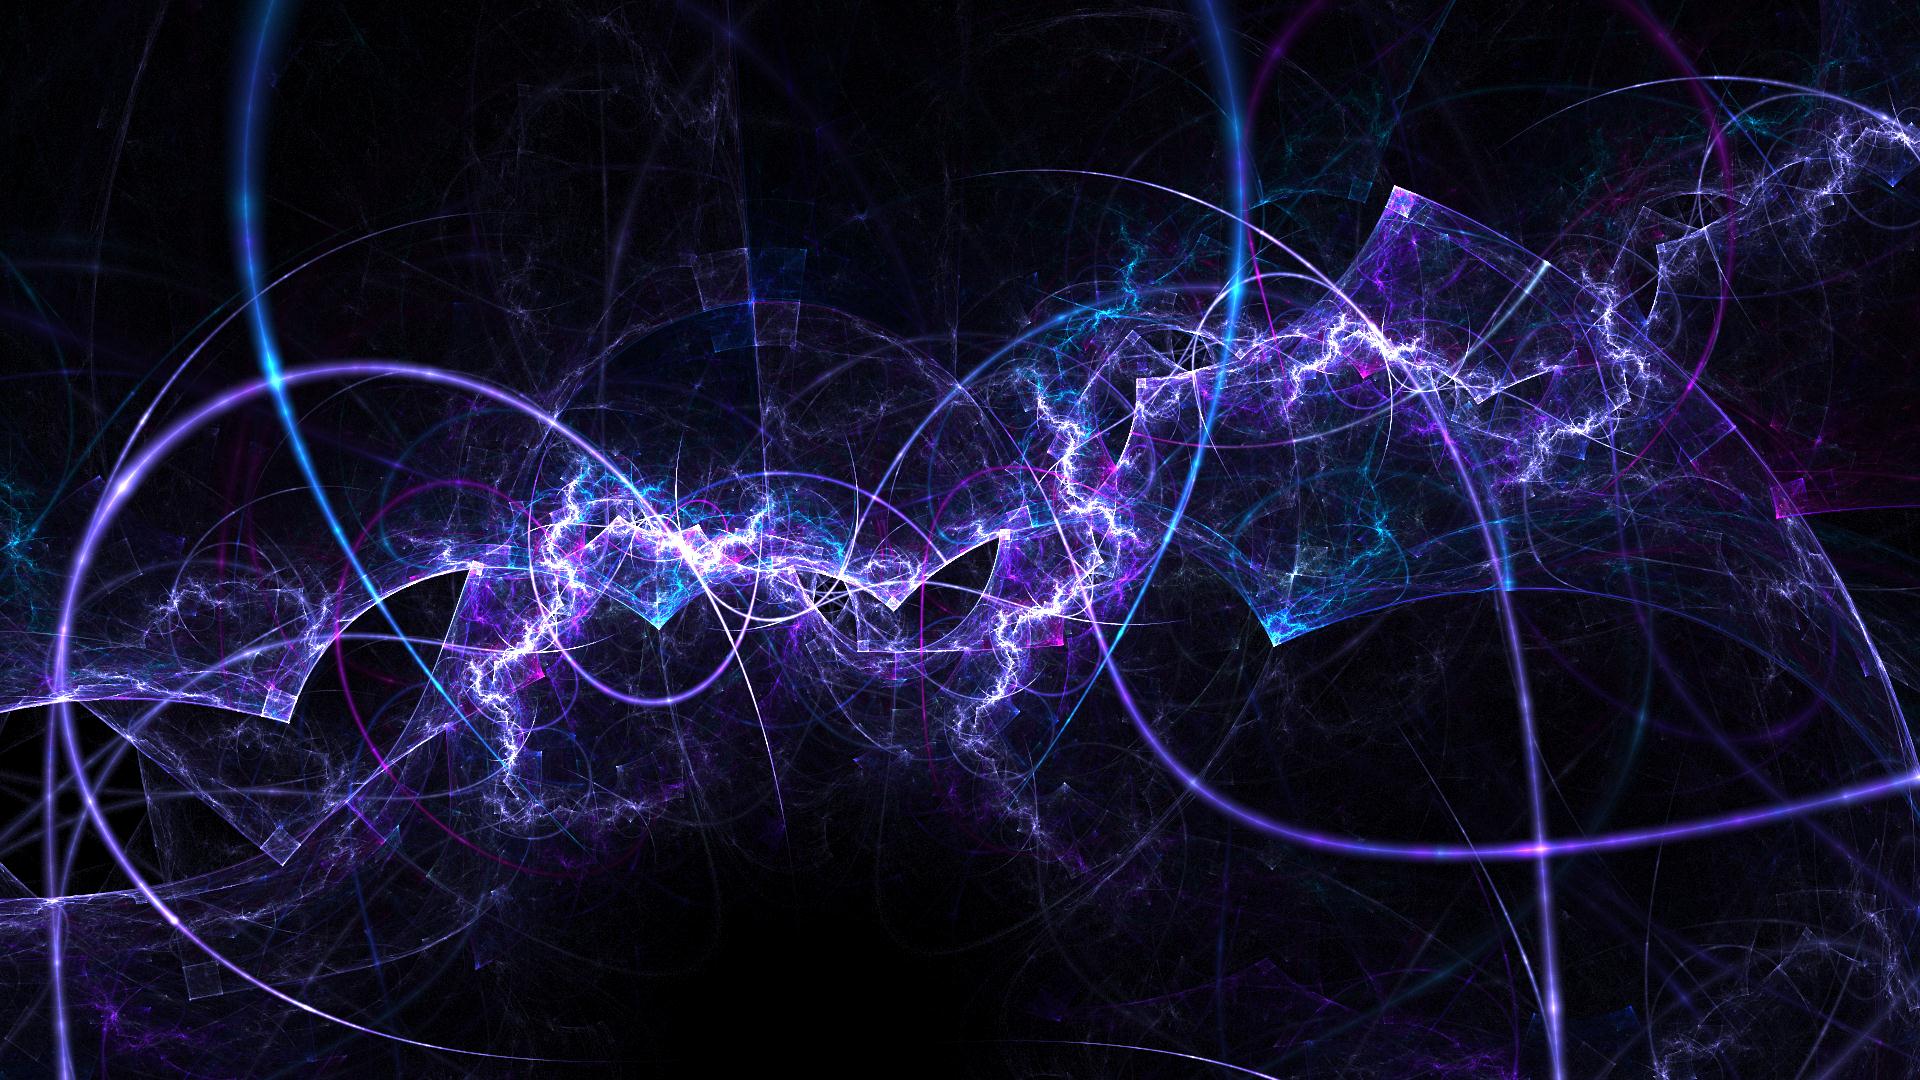 10K Glowing Abstract Shapes Art Wallpapers